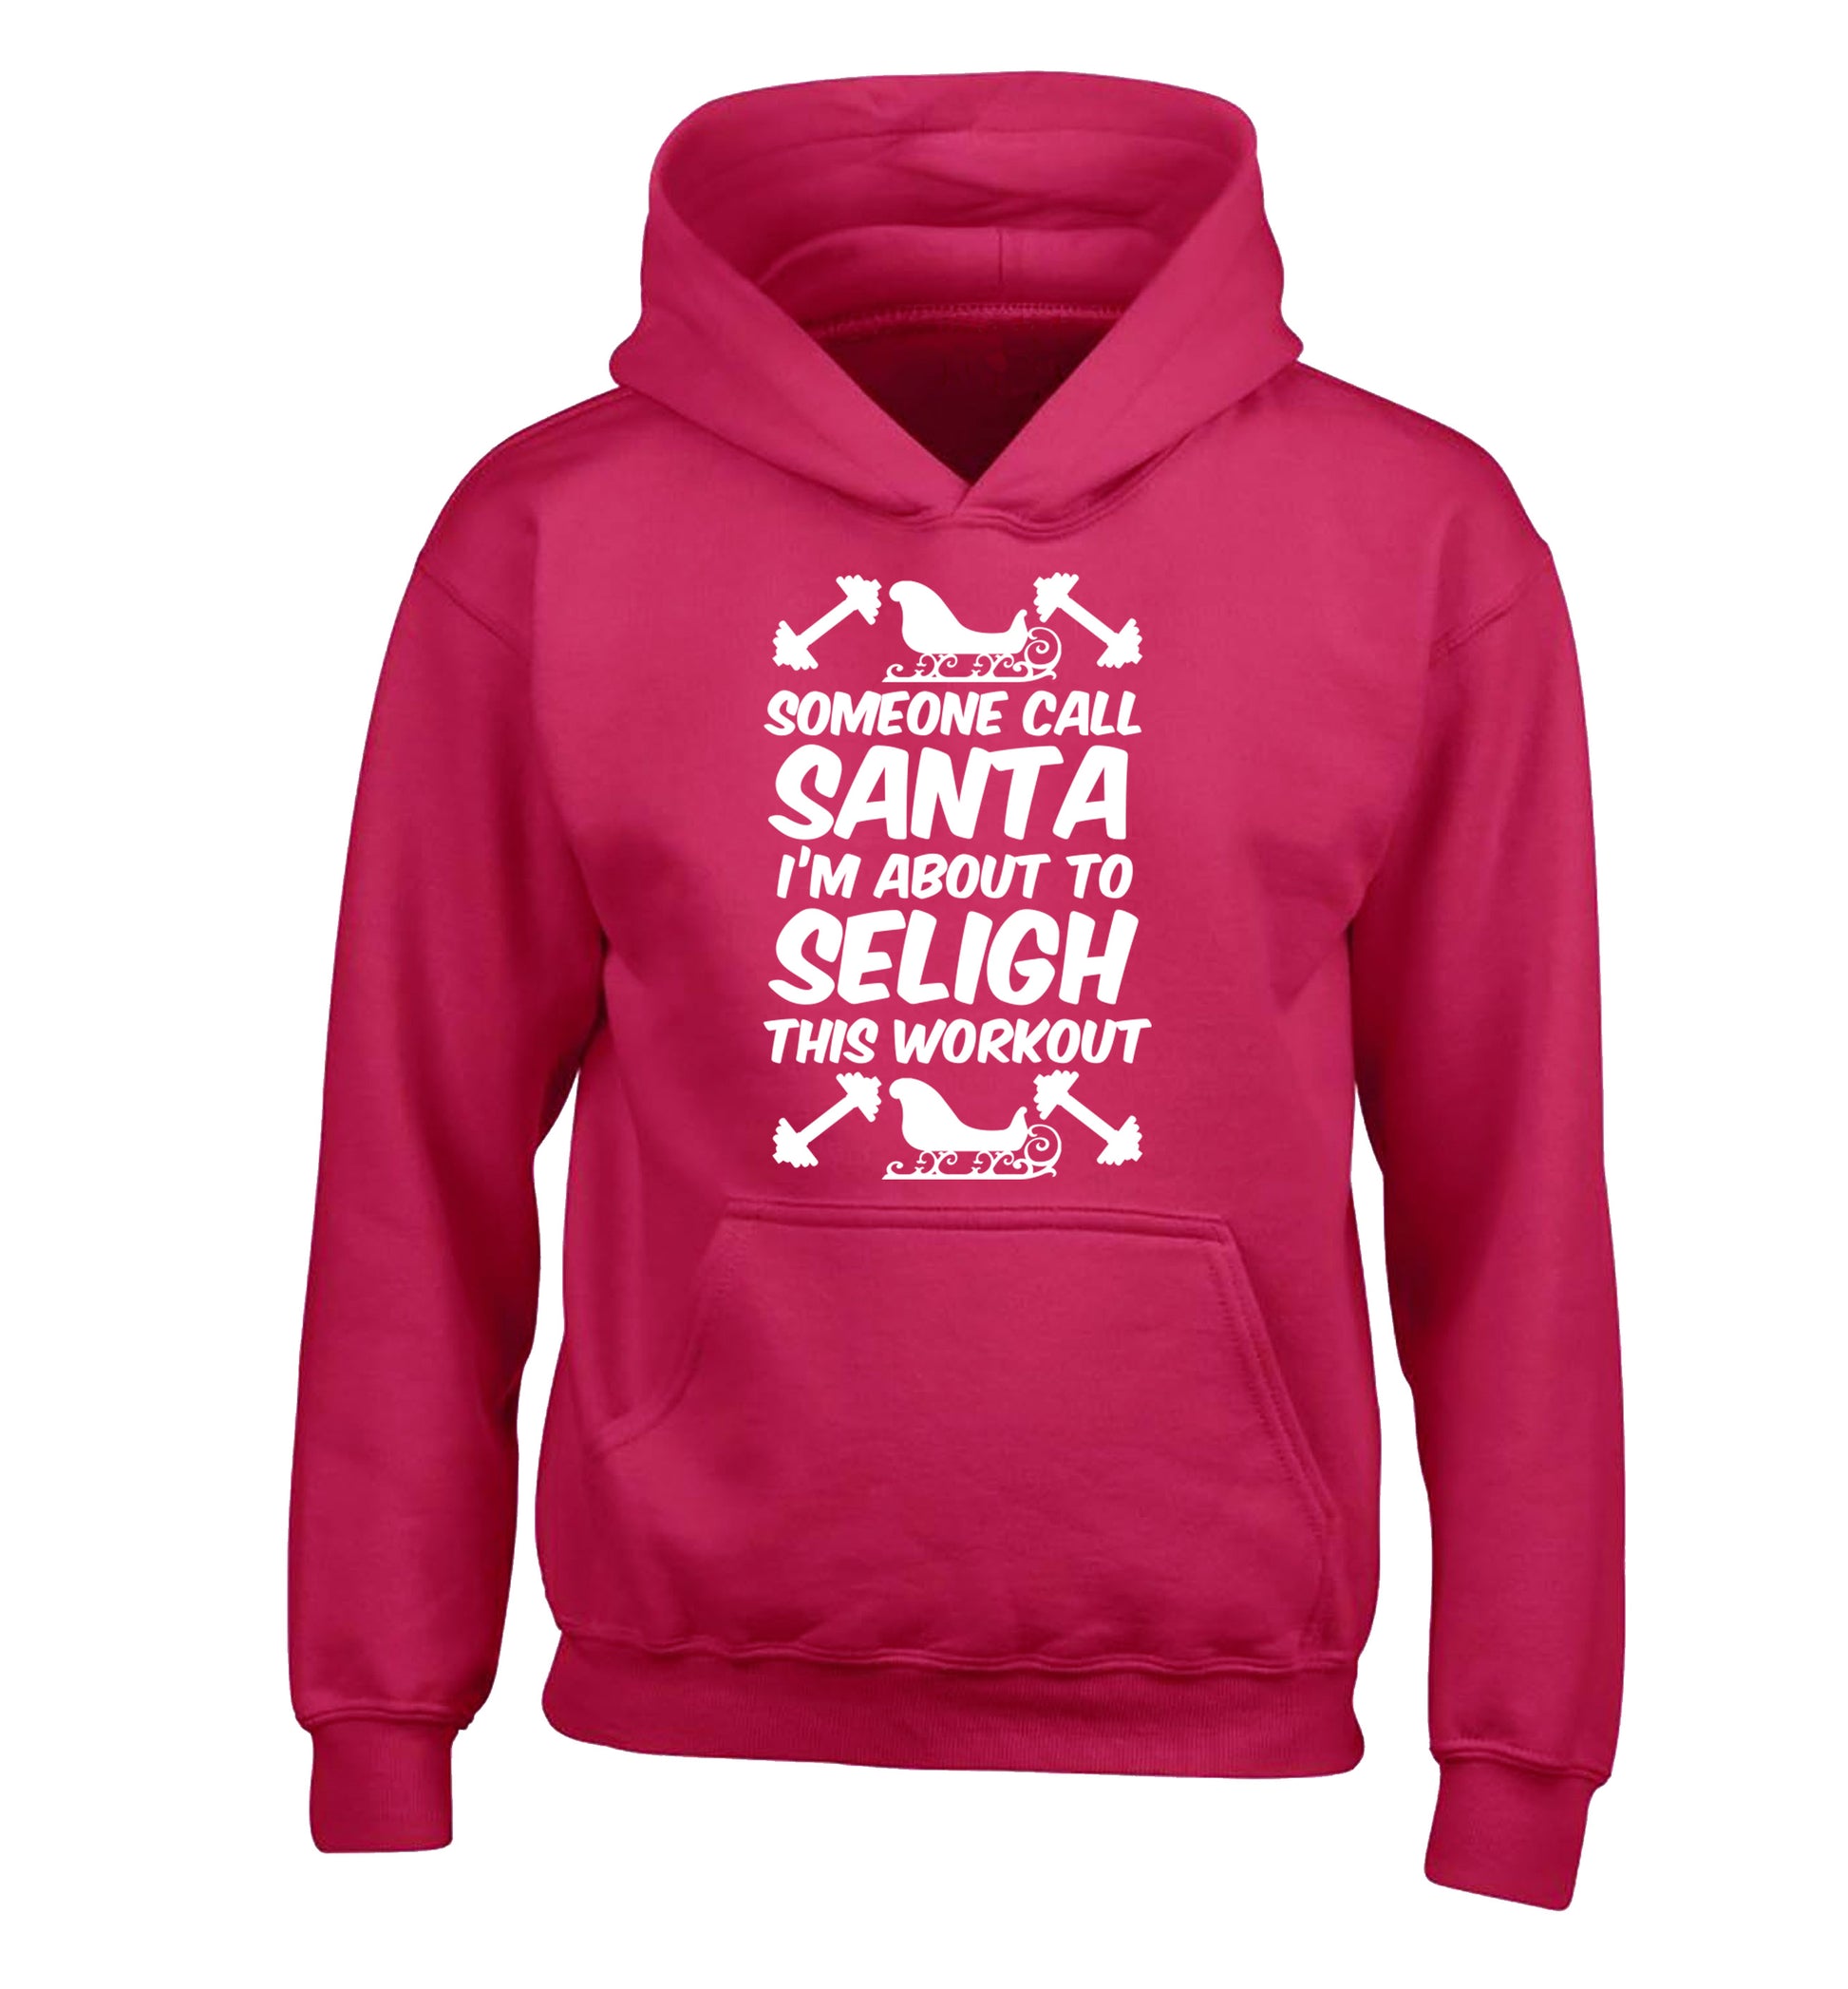 Someone call santa, I'm about to sleigh this workout children's pink hoodie 12-14 Years